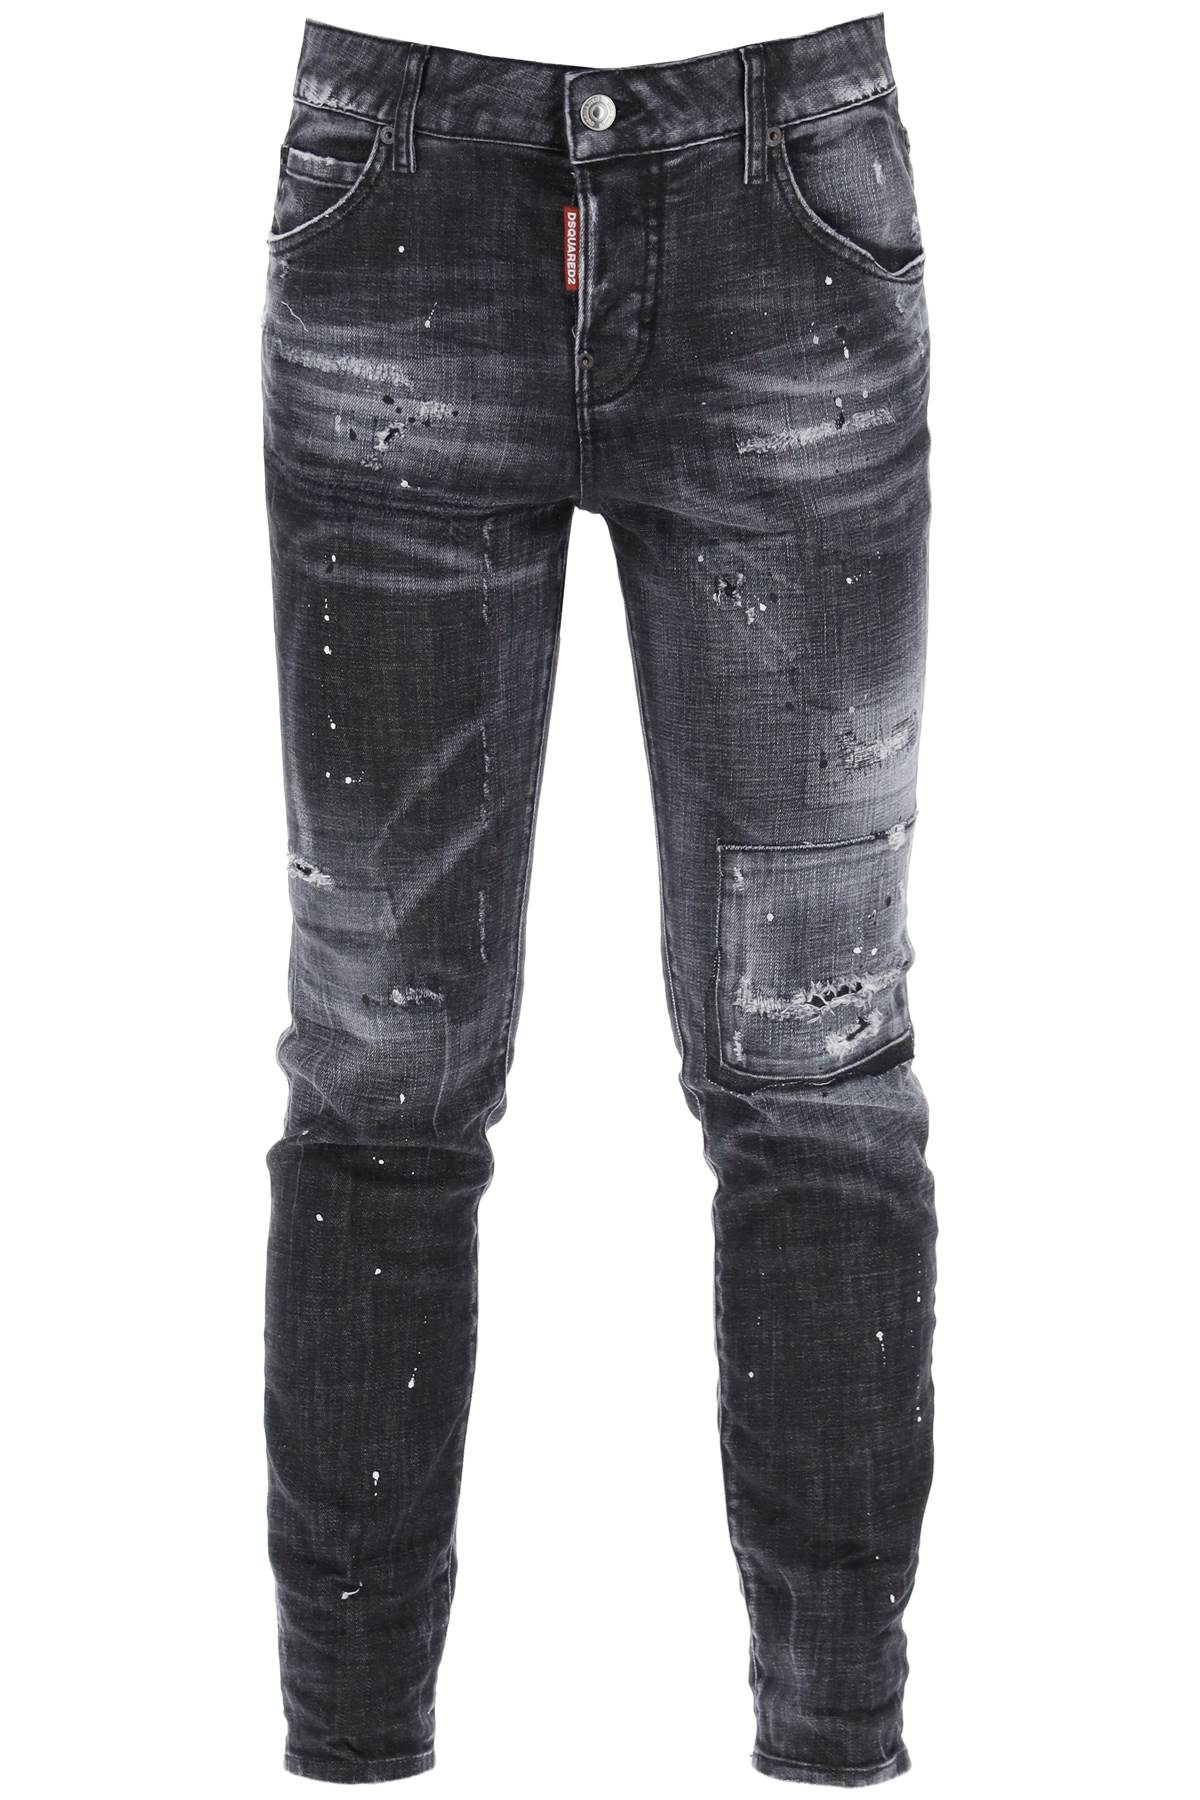 Cool and Edgy Distressed Skinny Jeans for Women in Black